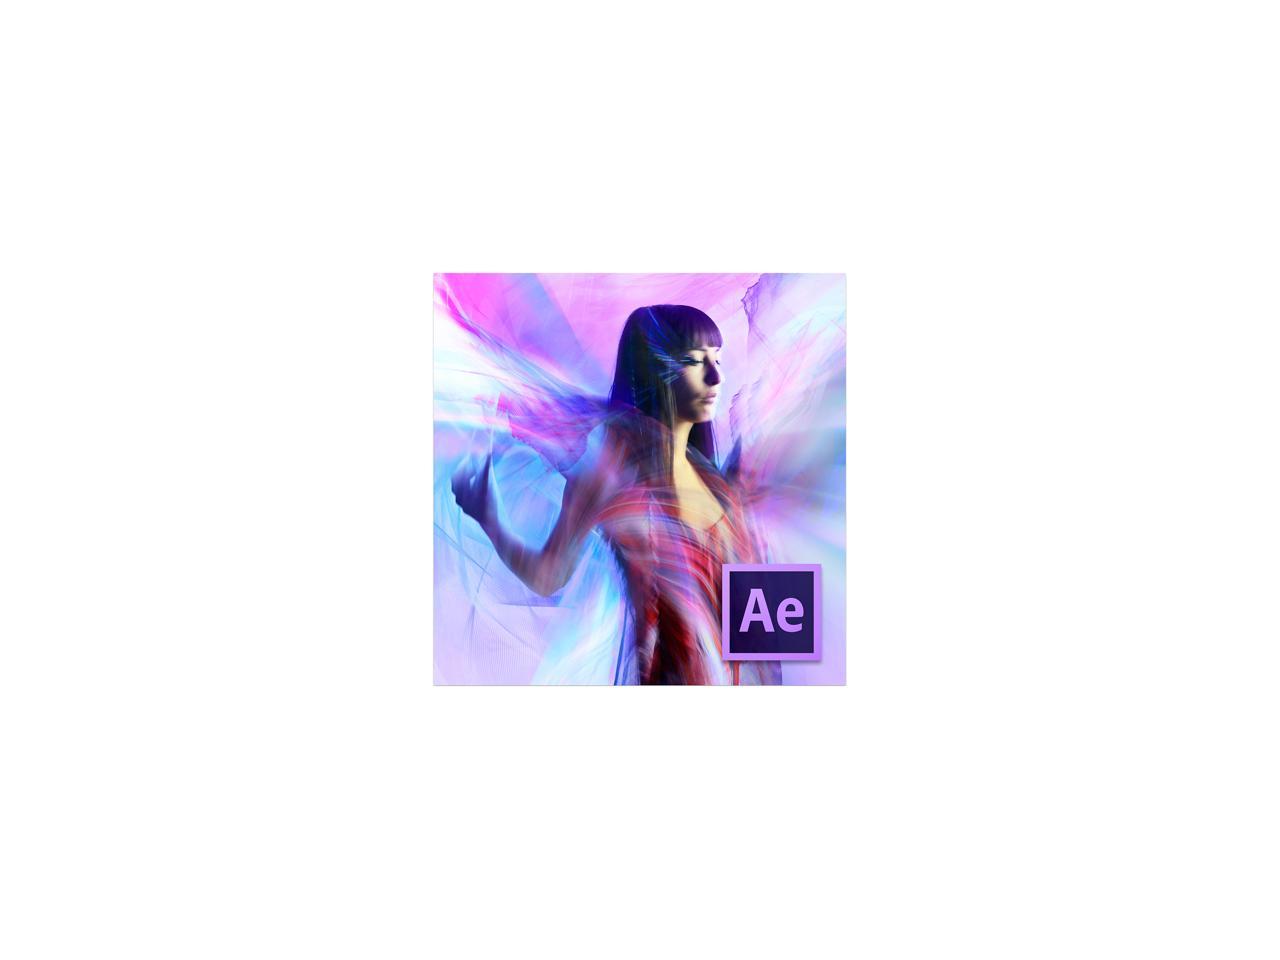 adobe after effects cs6 download